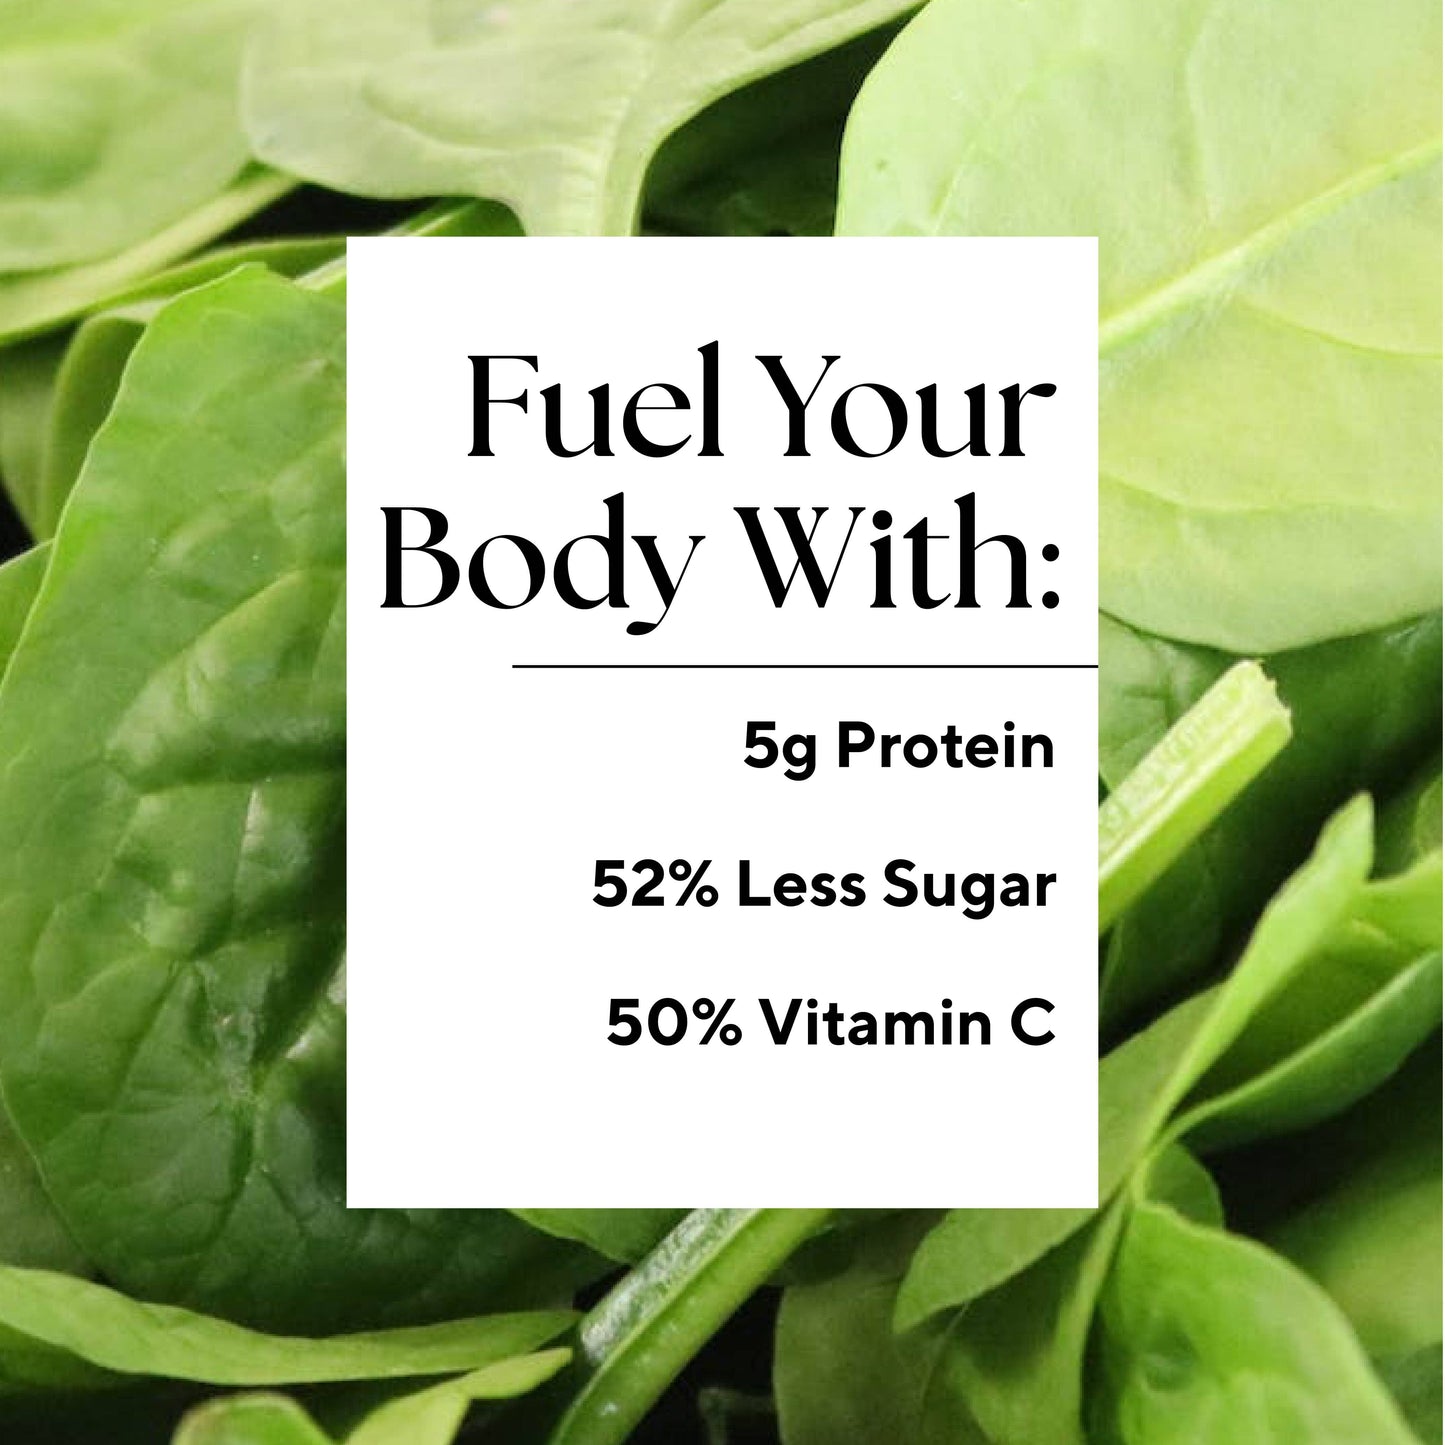 Infographic that reads: "Fuel your body with: 5g Protein, 52% Less Sugar, and 50% Vitamin C"